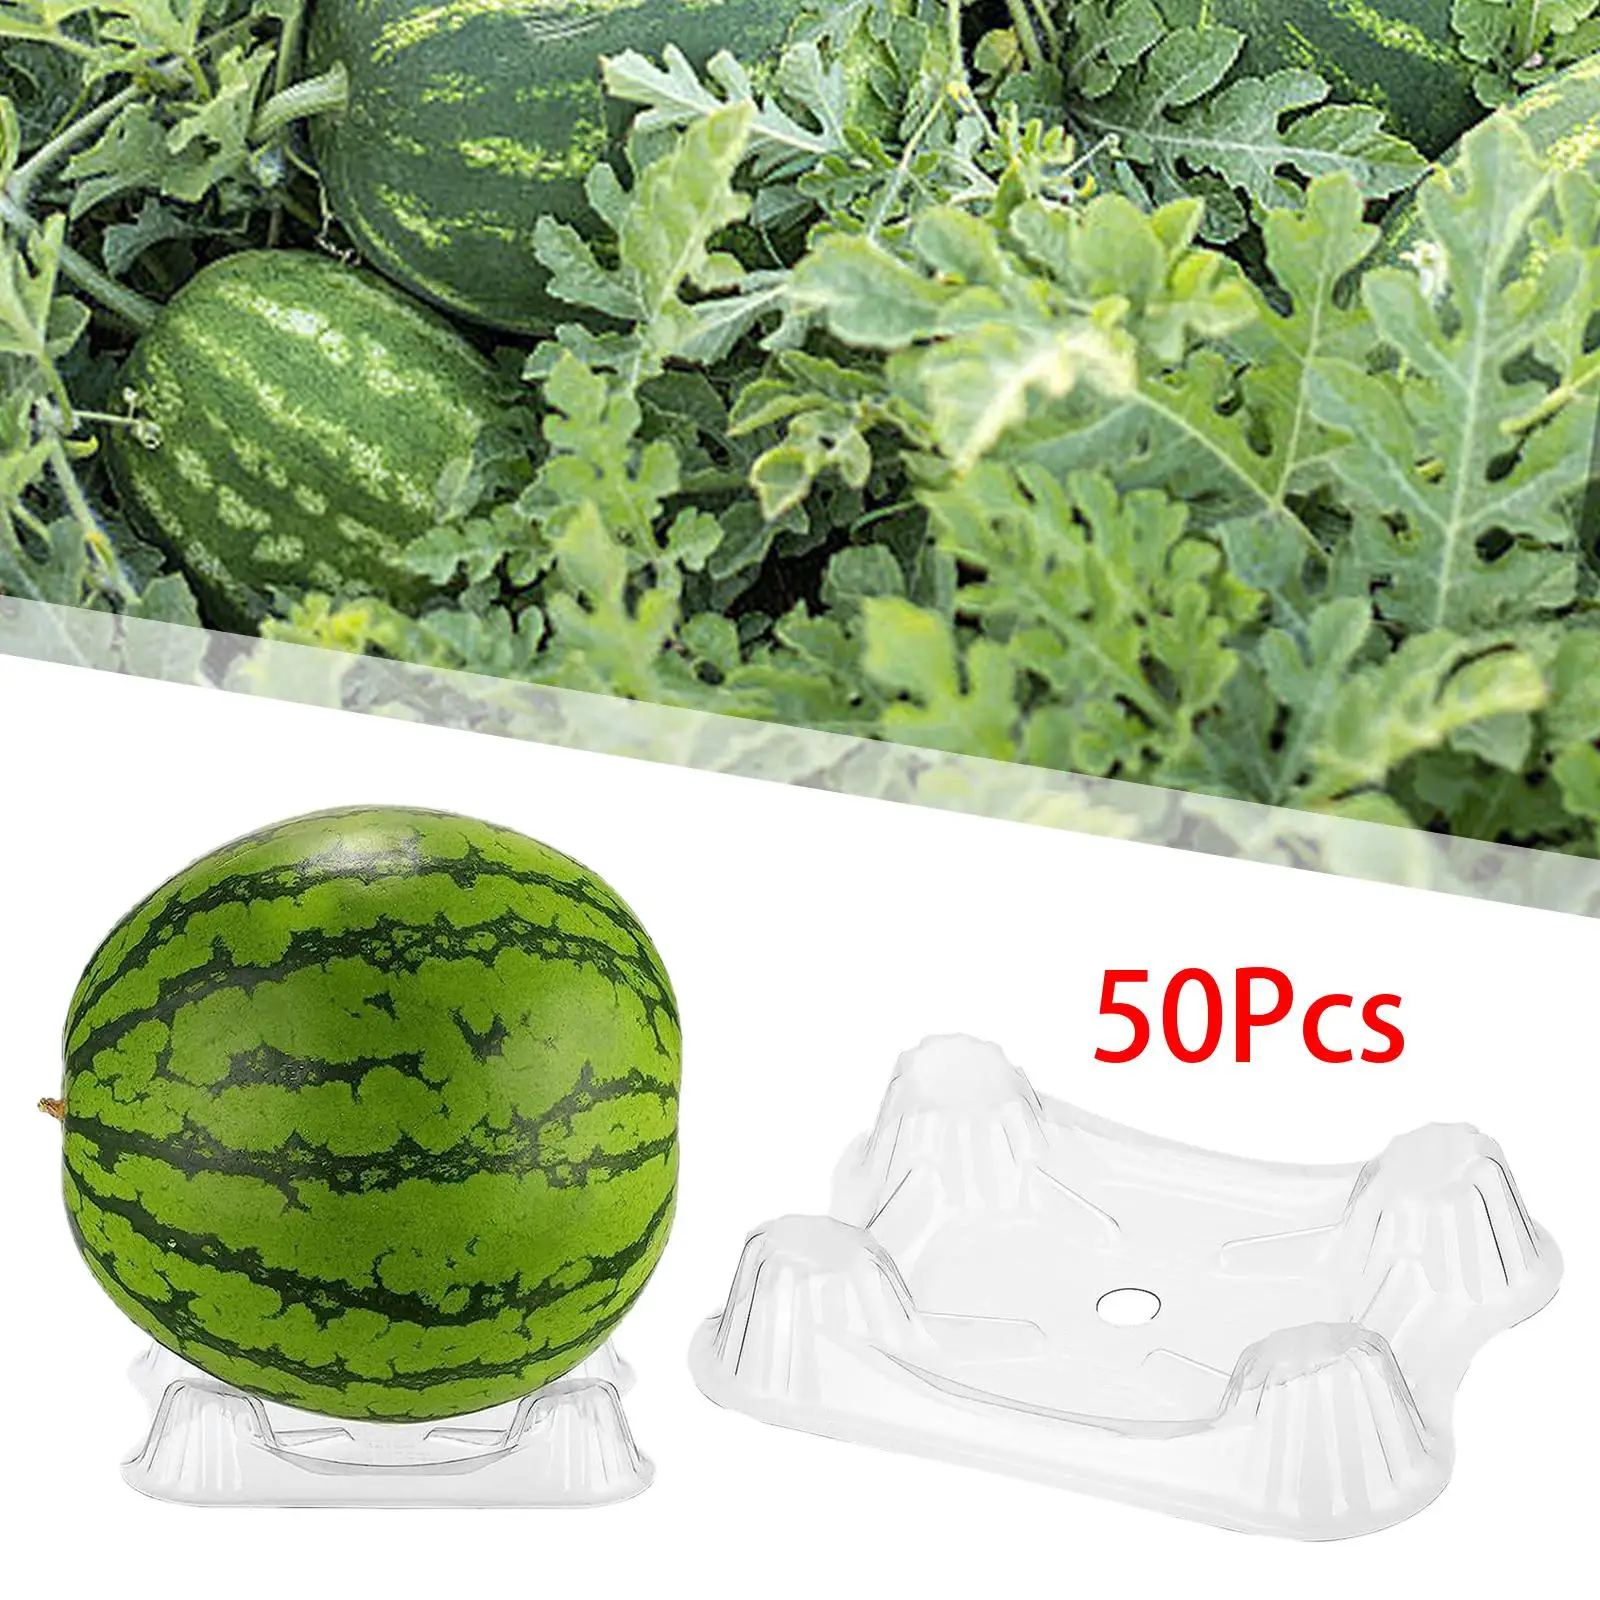 50x Melon Support Cradle for Gardening Protector Melon Support Watermelon Holder for Squash Vegetable Watermelon Strawberry Accs